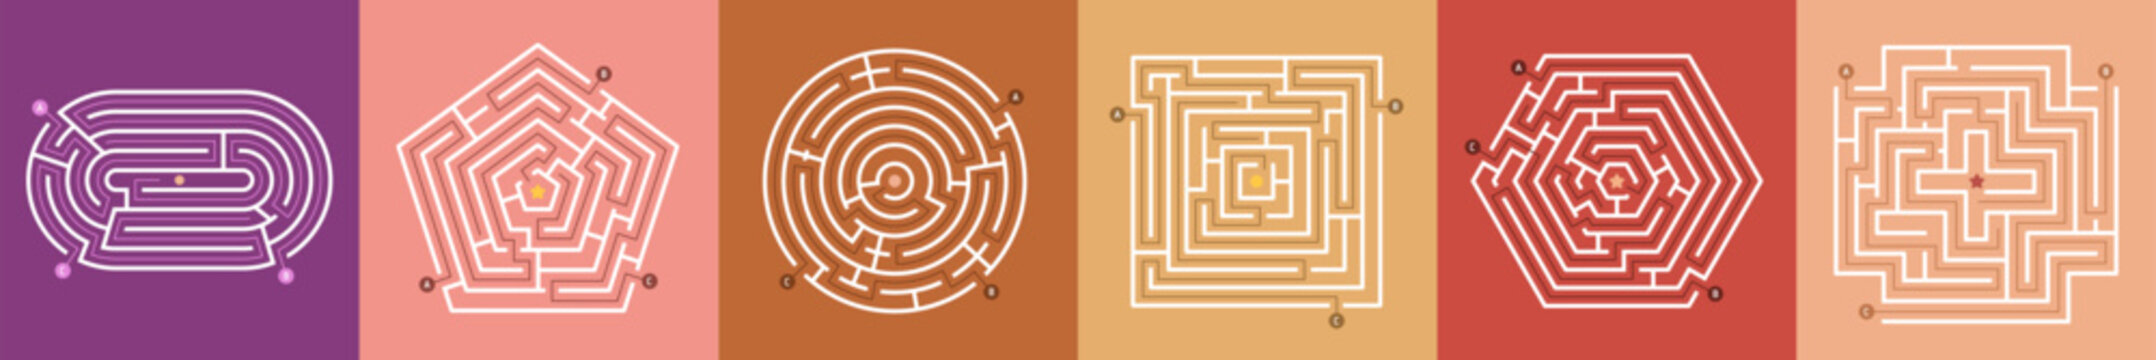 Maze set. Labyrinth games, path puzzles with entrance, exit. Map conundrum, right route search challenge. Kids riddle, confused lines, rebus designs for finding direction. Flat vector illustration